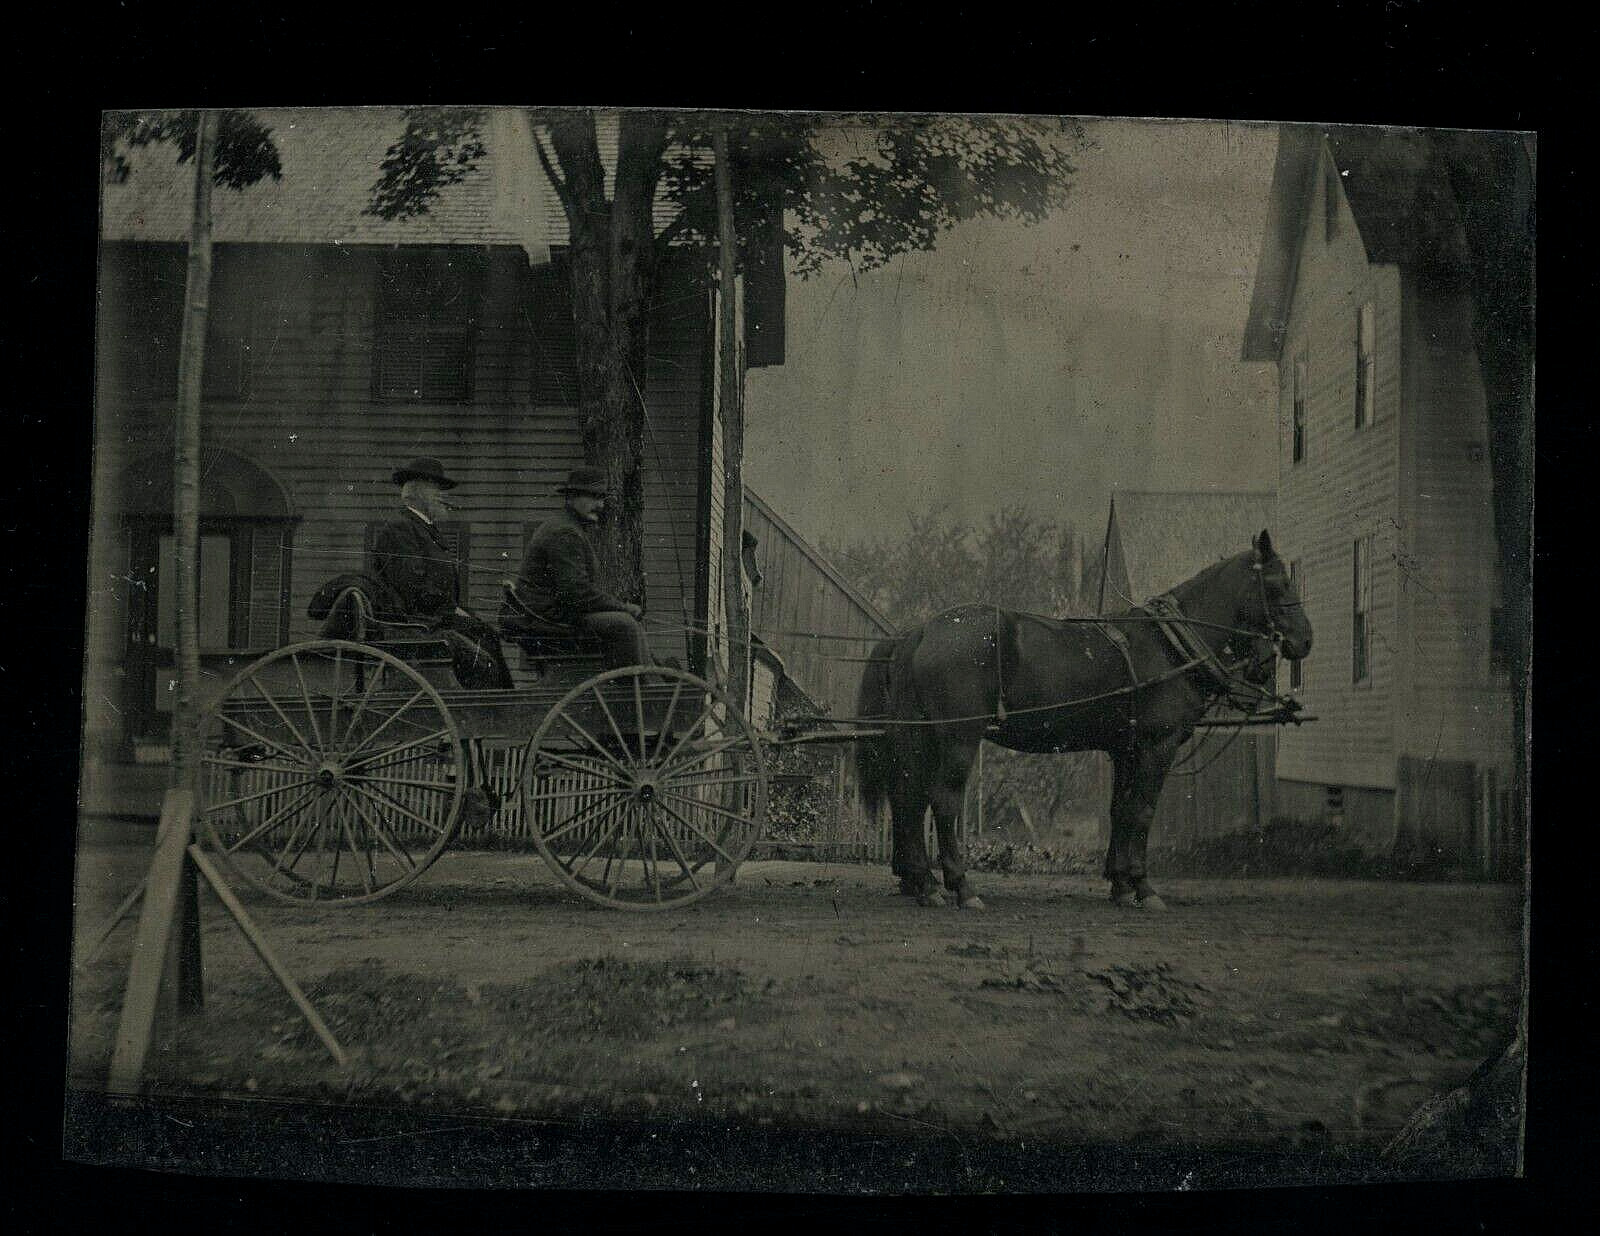 outdoor men driving horse carriage houses street antique tintype photo 1800s